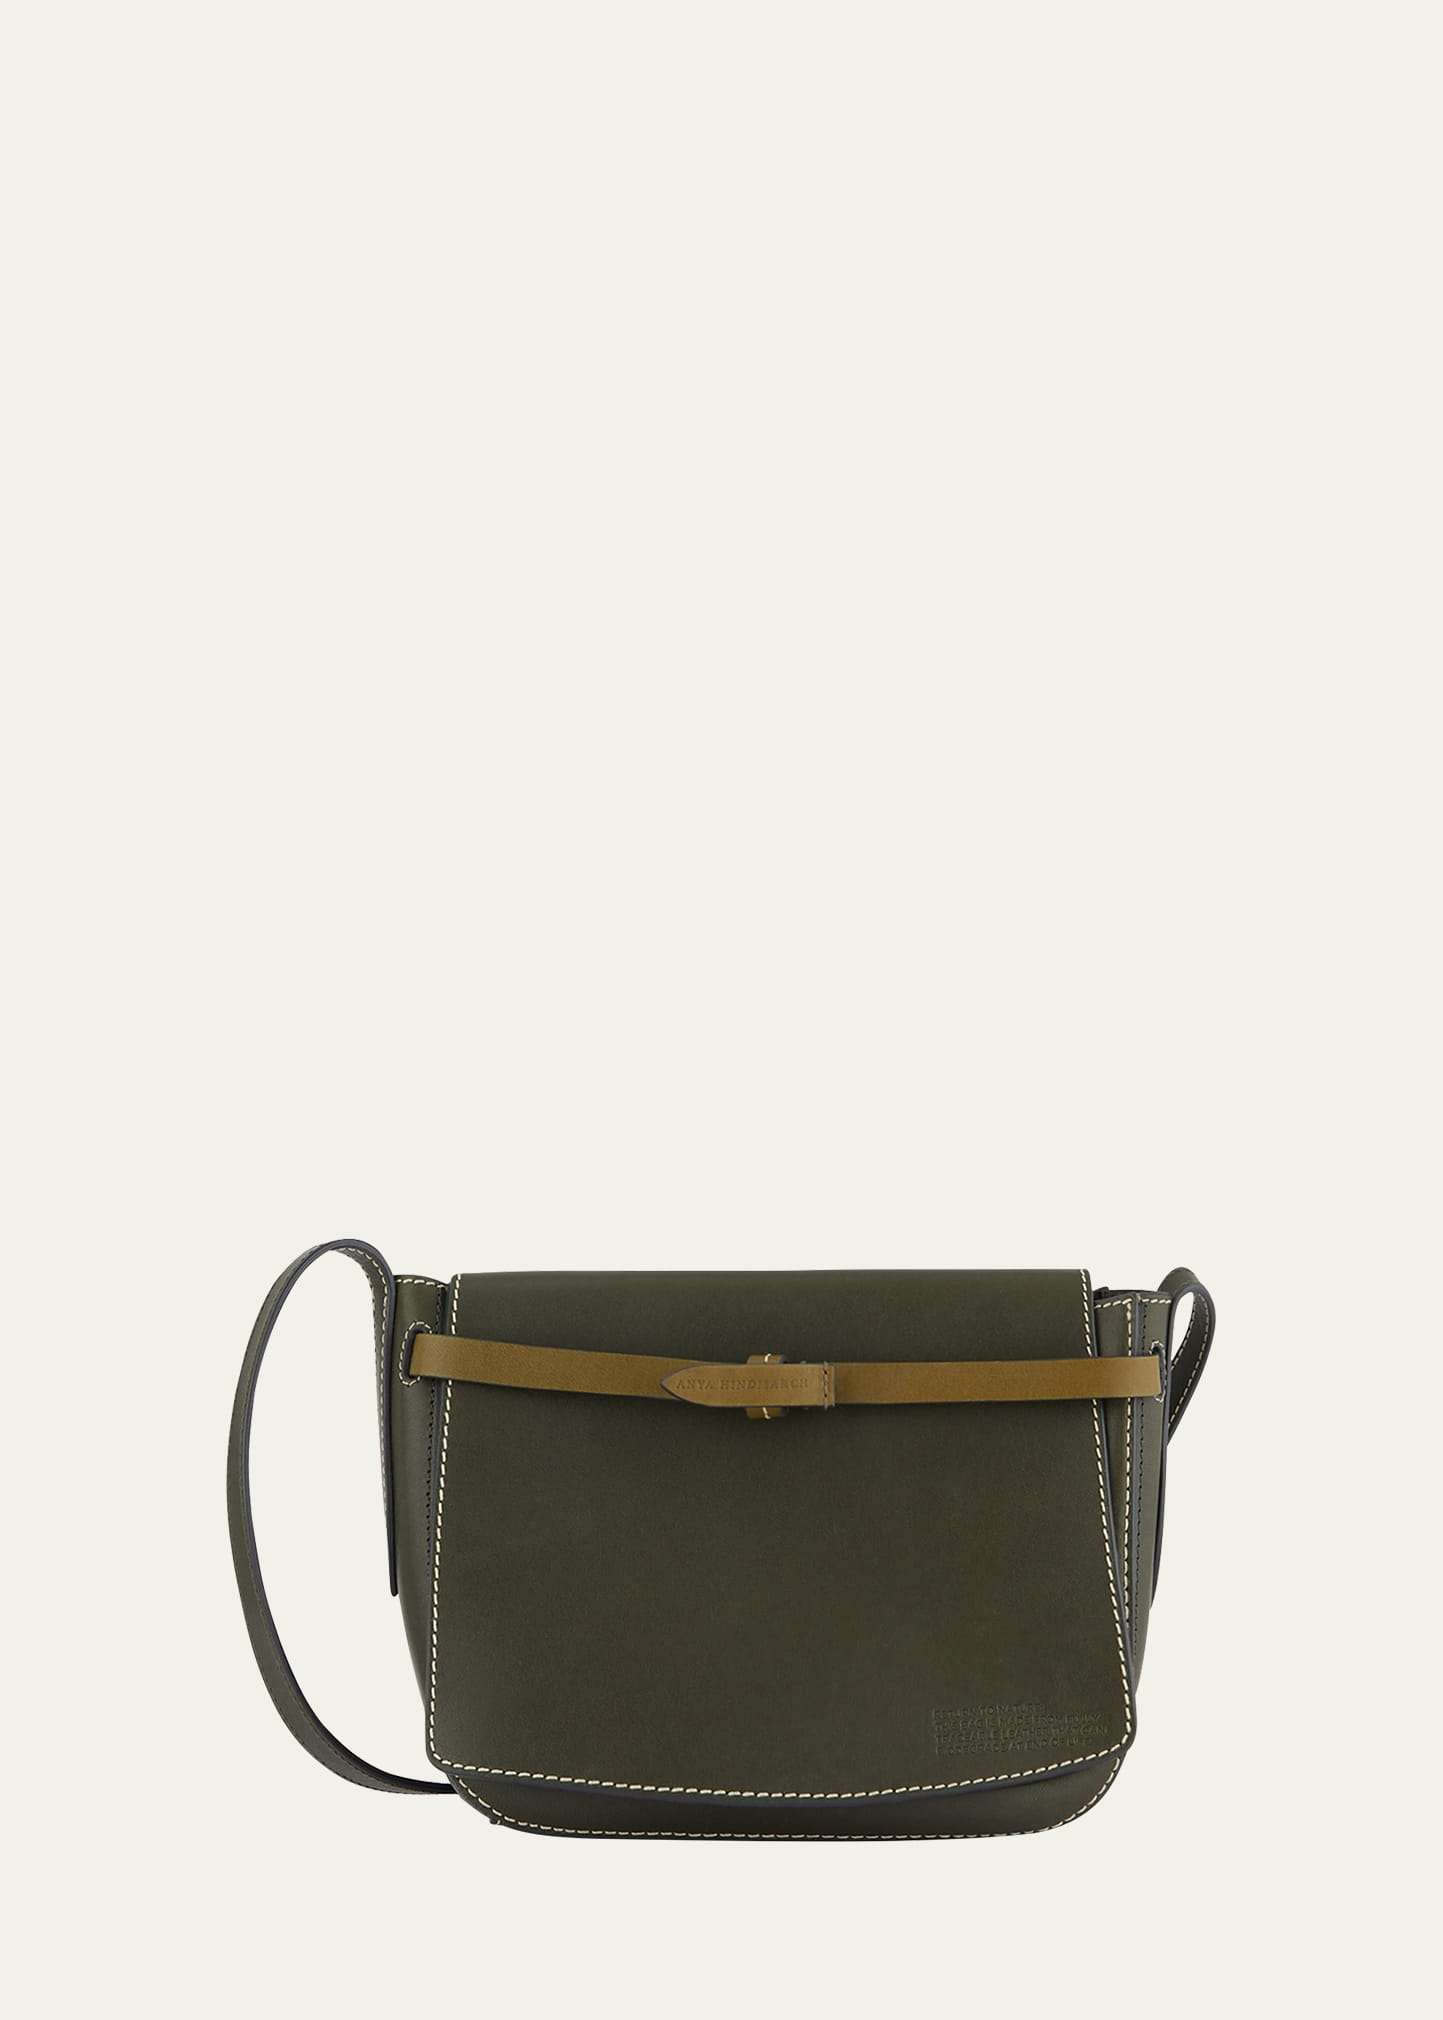 Anya Hindmarch Return To Nature Flap Leather Crossbody Bag In Dark Olive